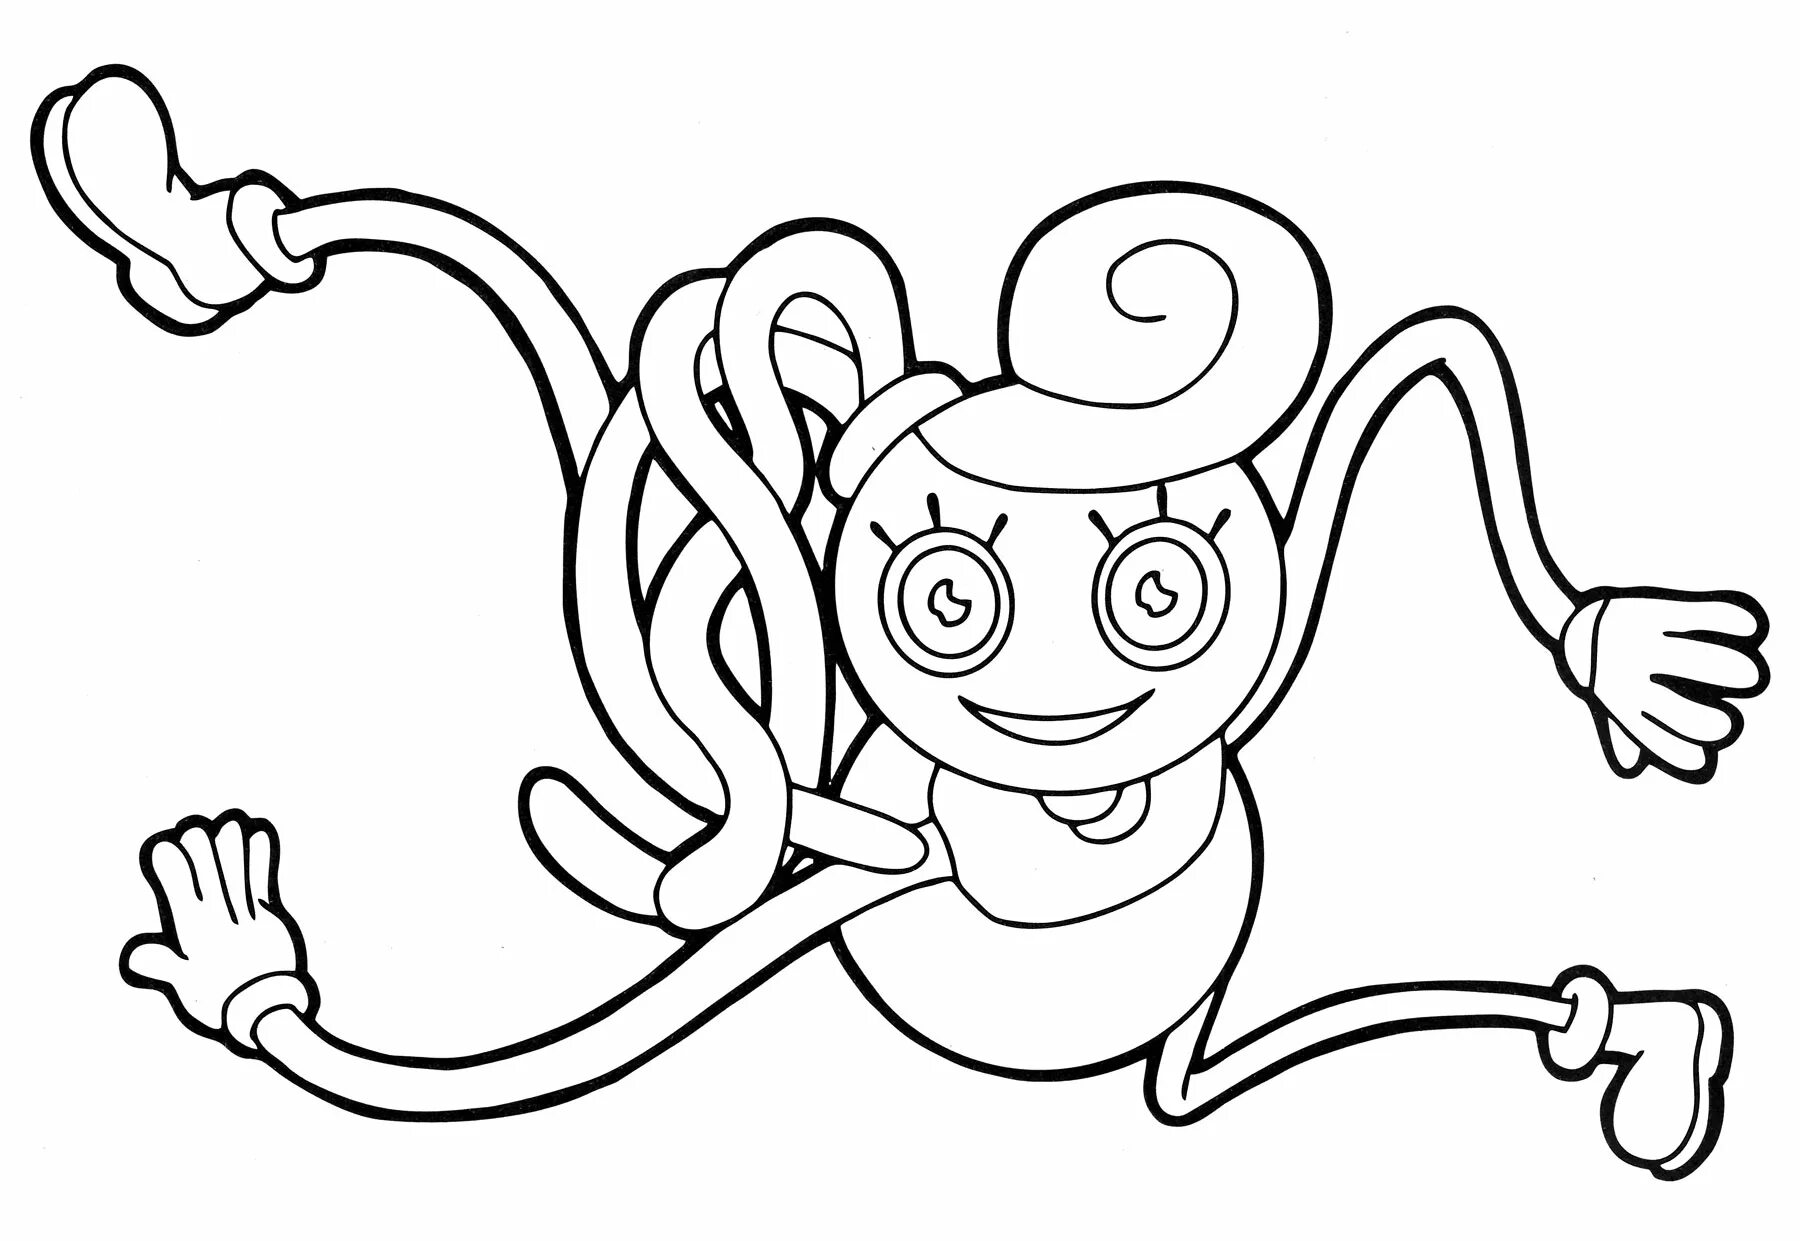 Peppy's delight coloring page